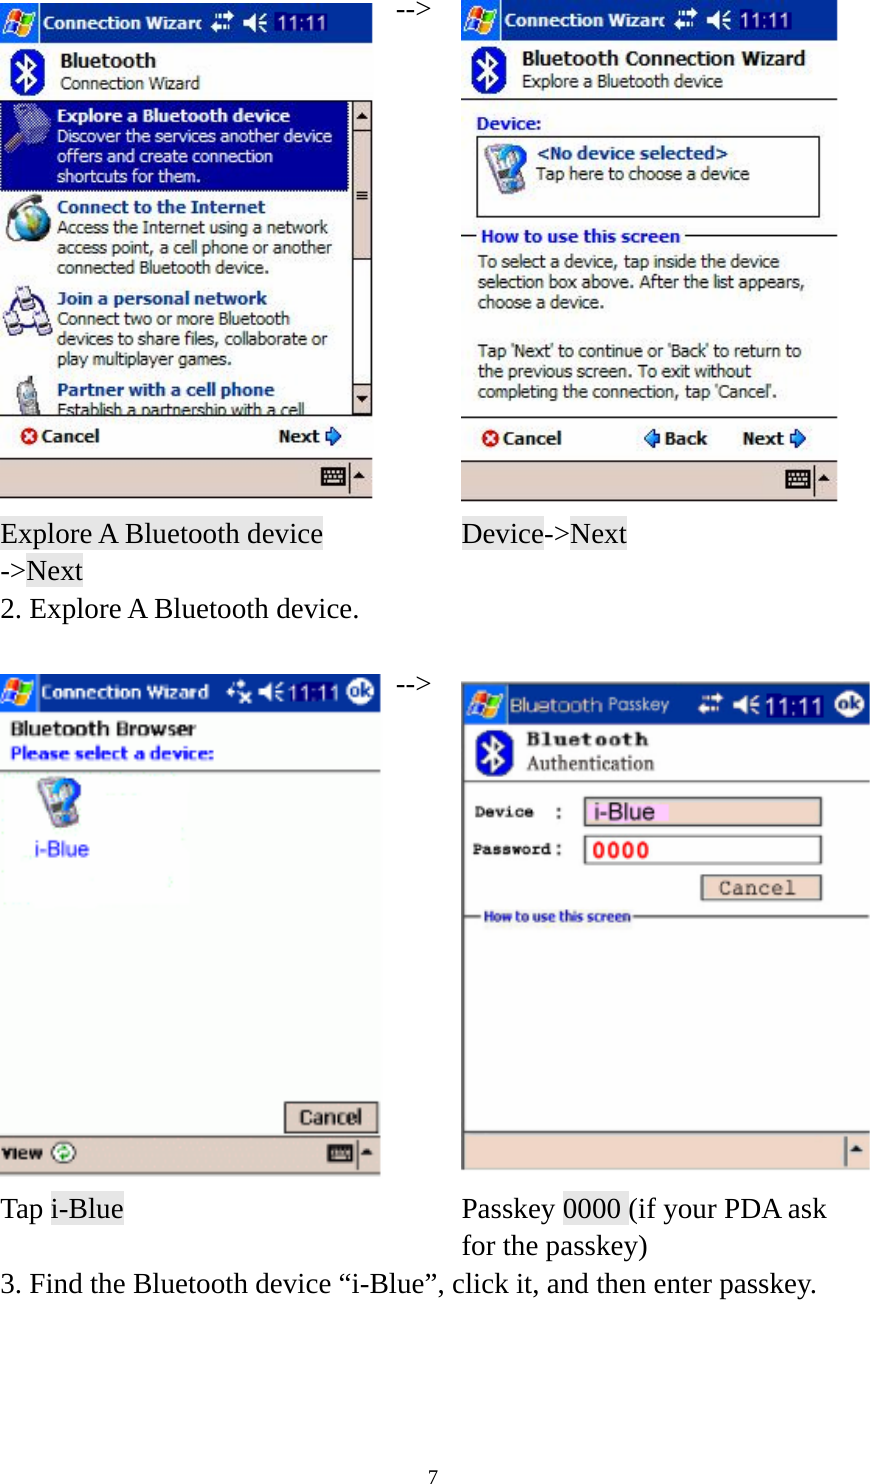    7--&gt; Explore A Bluetooth device -&gt;Next  Device-&gt;Next 2. Explore A Bluetooth device.  --&gt;Tap i-Blue    Passkey 0000 (if your PDA ask for the passkey) 3. Find the Bluetooth device “i-Blue”, click it, and then enter passkey.    